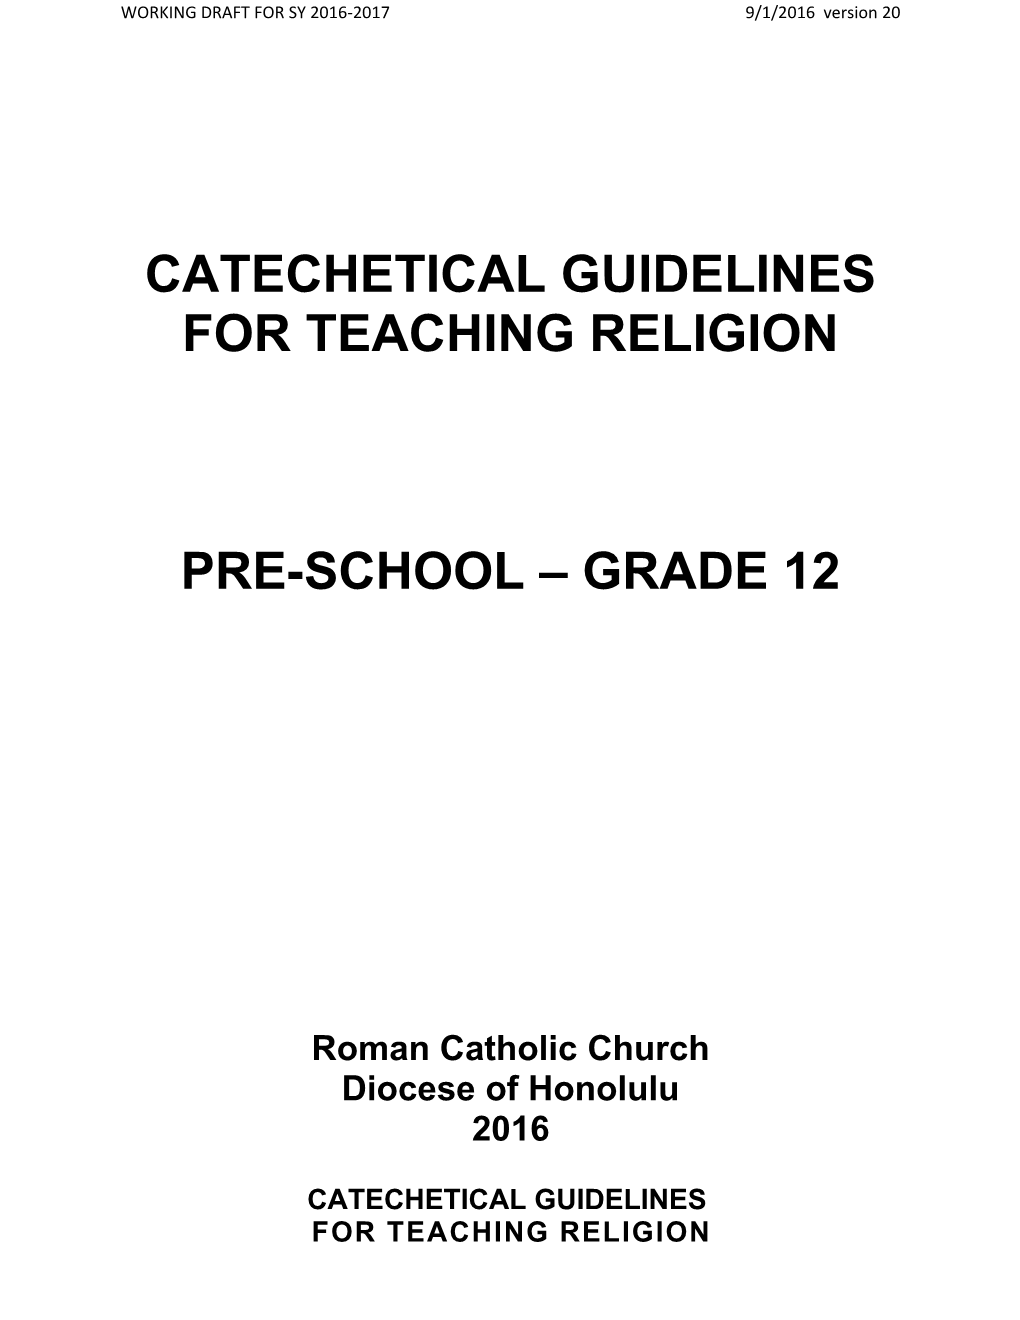 Catechetical Guidelines